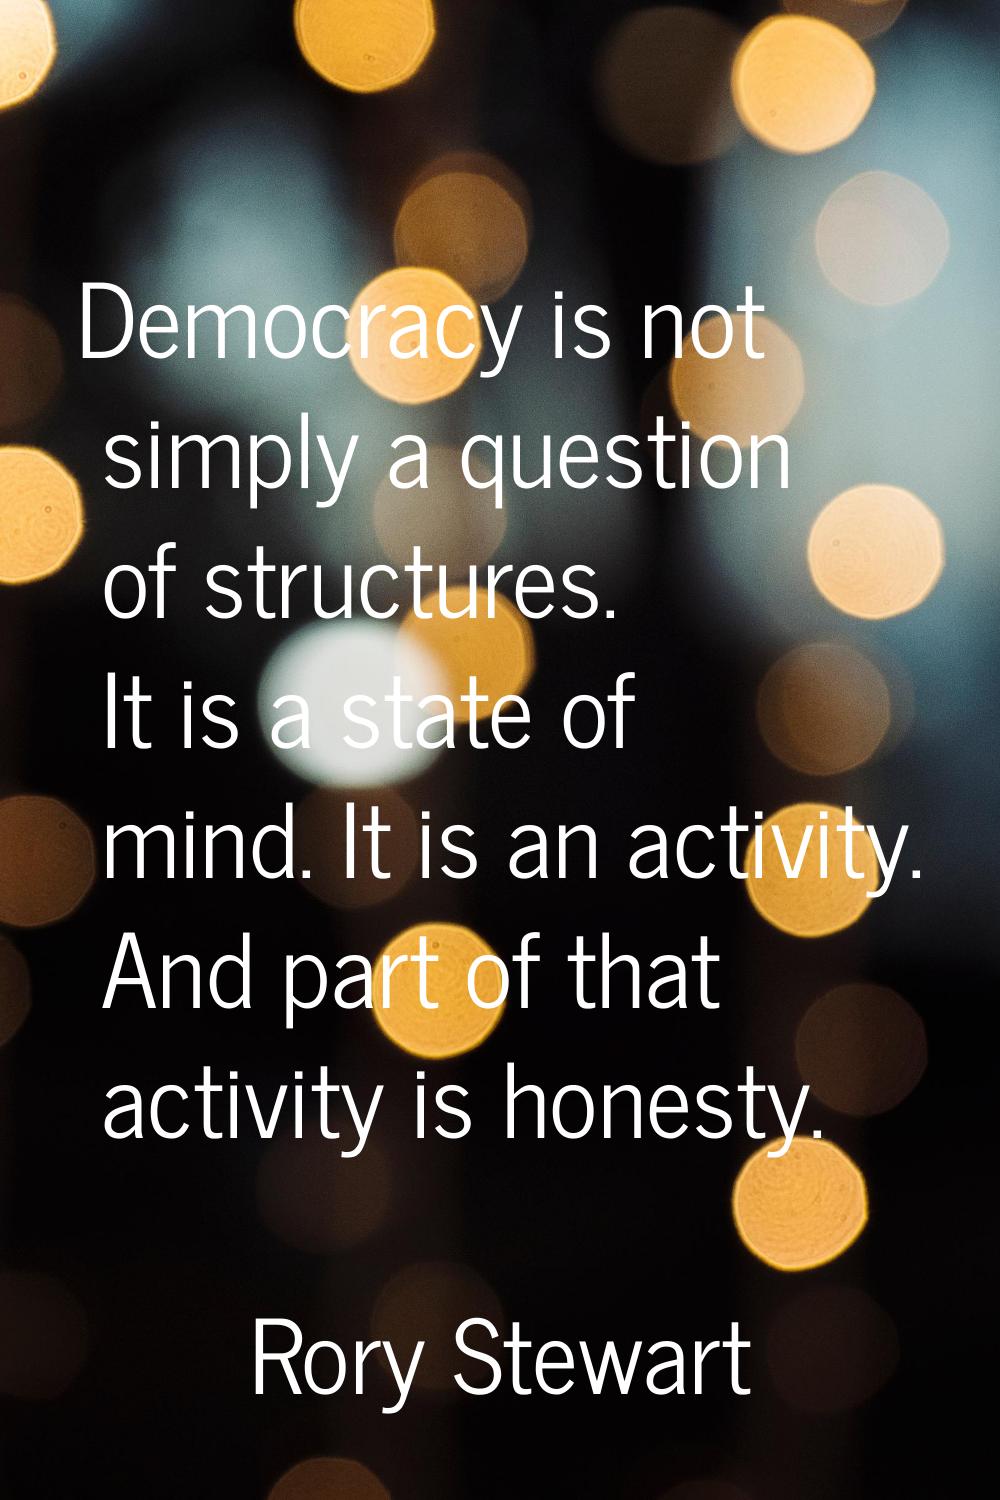 Democracy is not simply a question of structures. It is a state of mind. It is an activity. And par